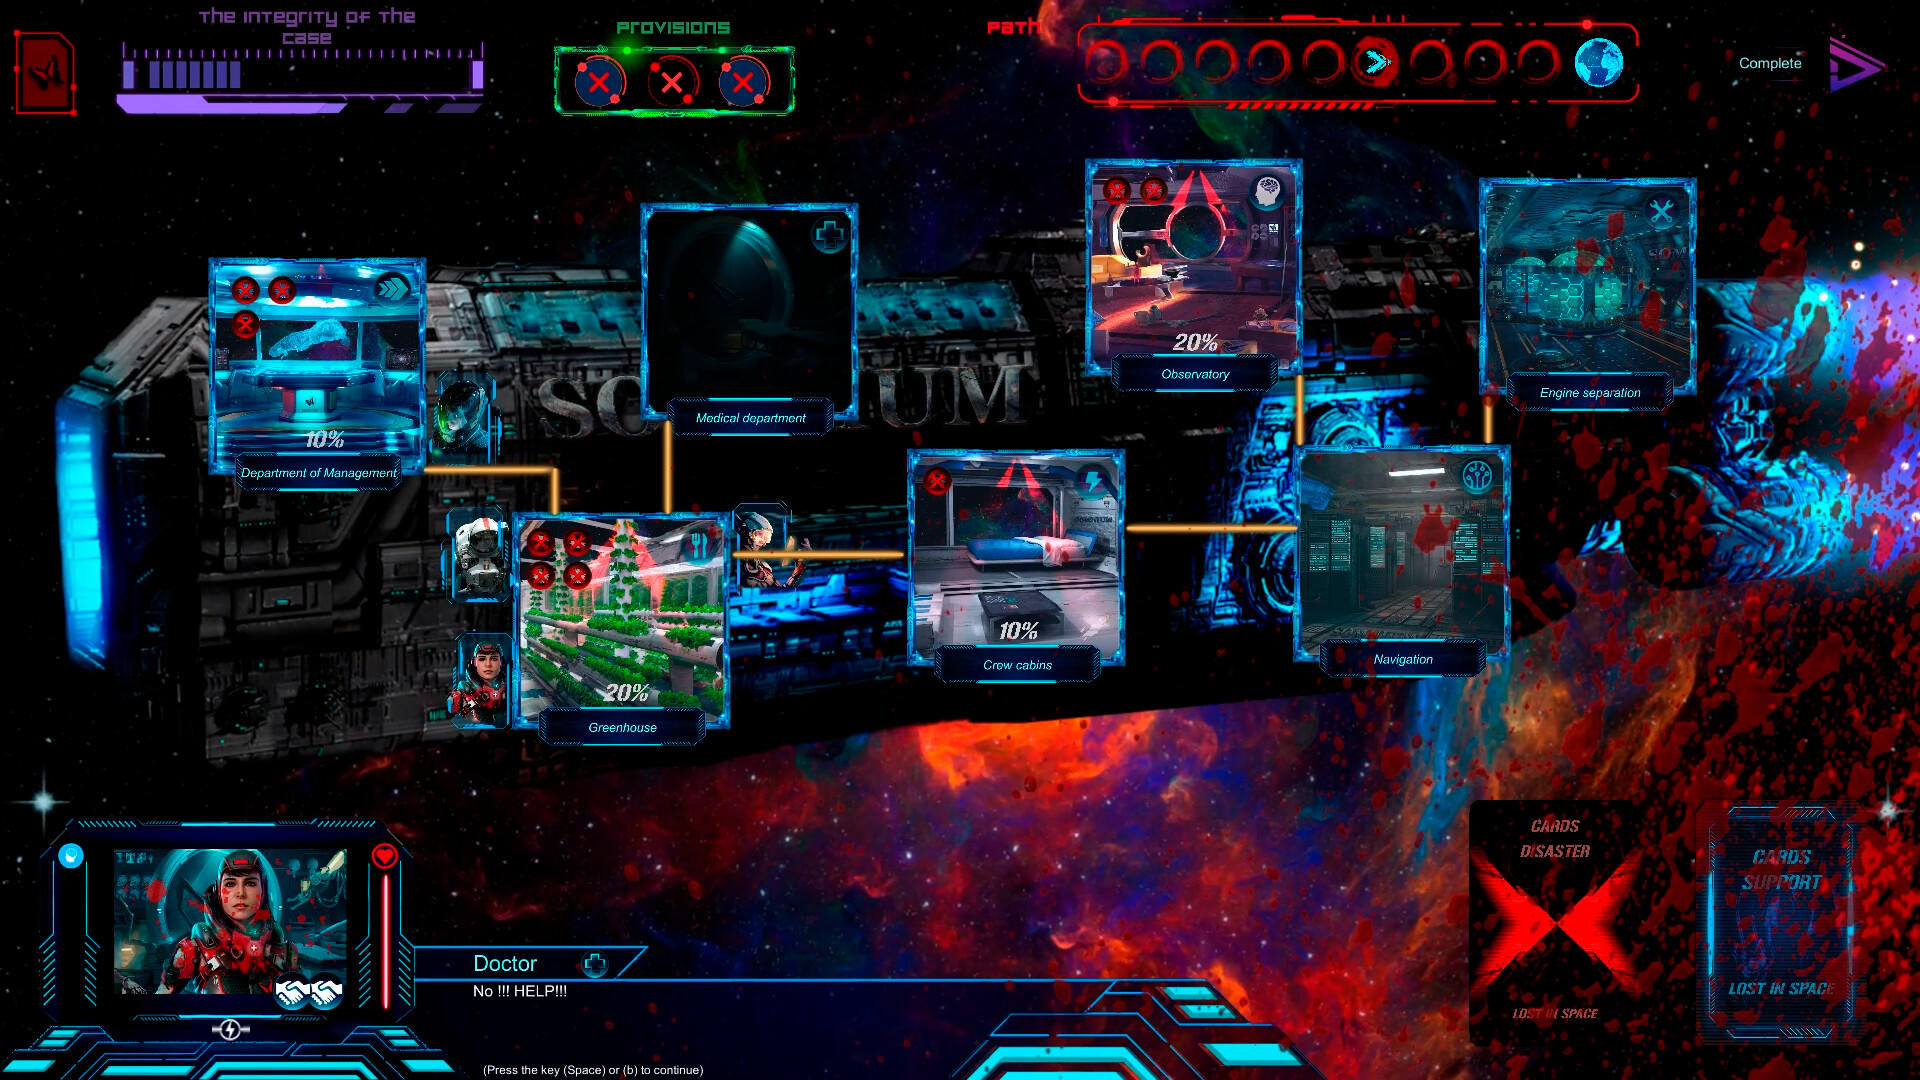 Lost in Space screenshot game